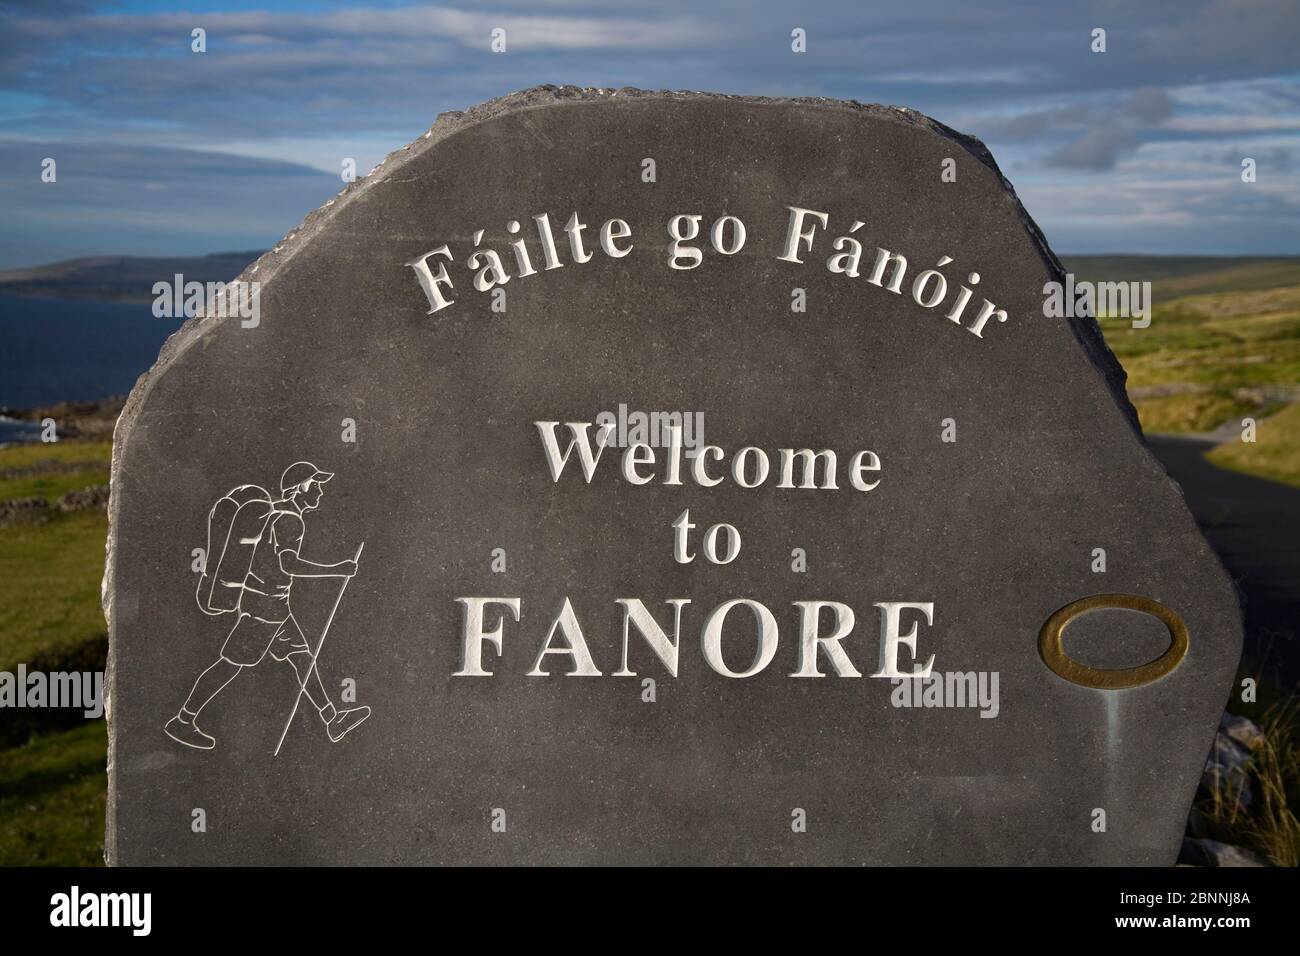 Fanore welcome sign, Fanore County Clare, Ireland Stock Photo - Alamy